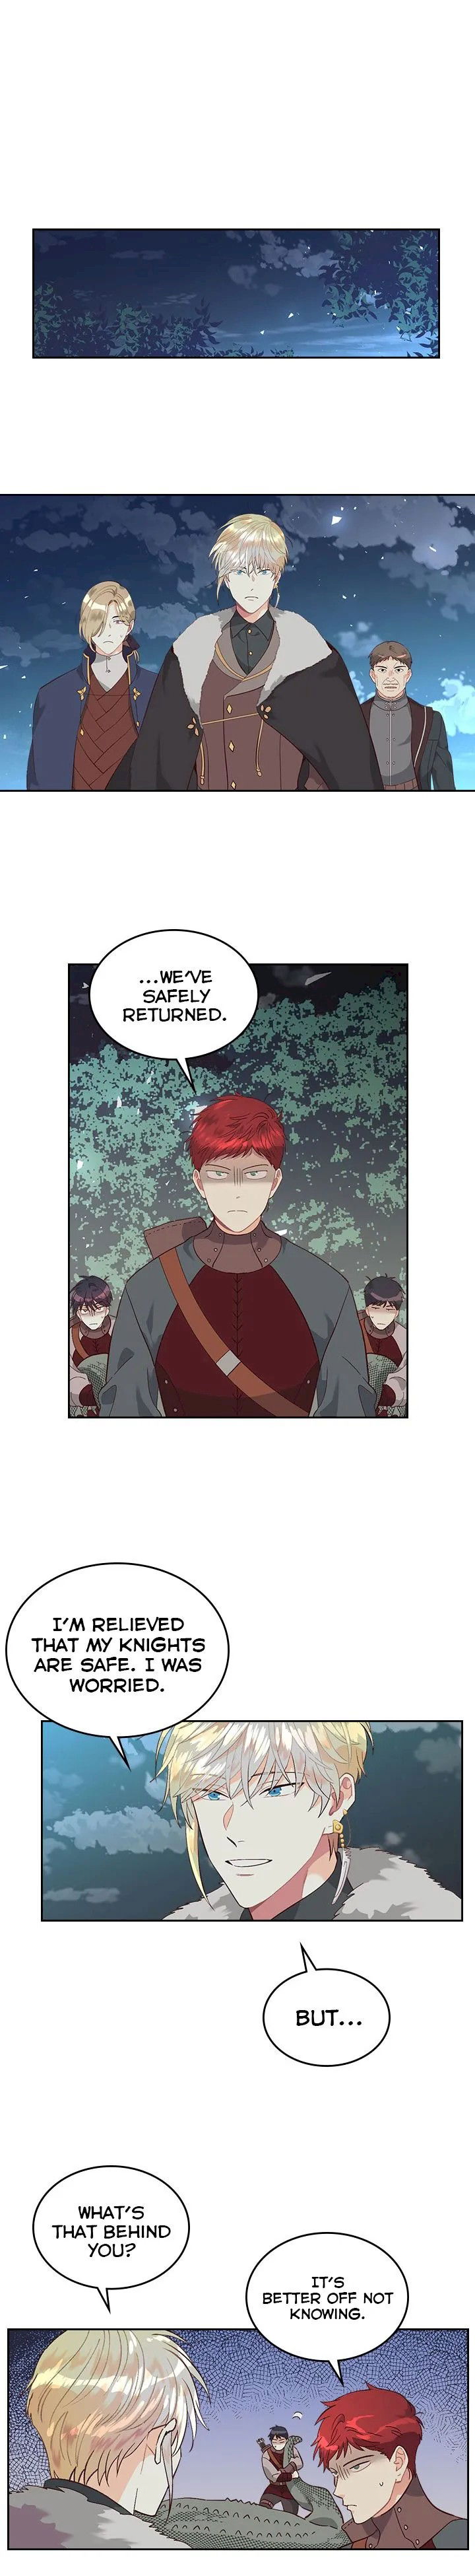 emperor-and-the-female-knight-chap-36-11